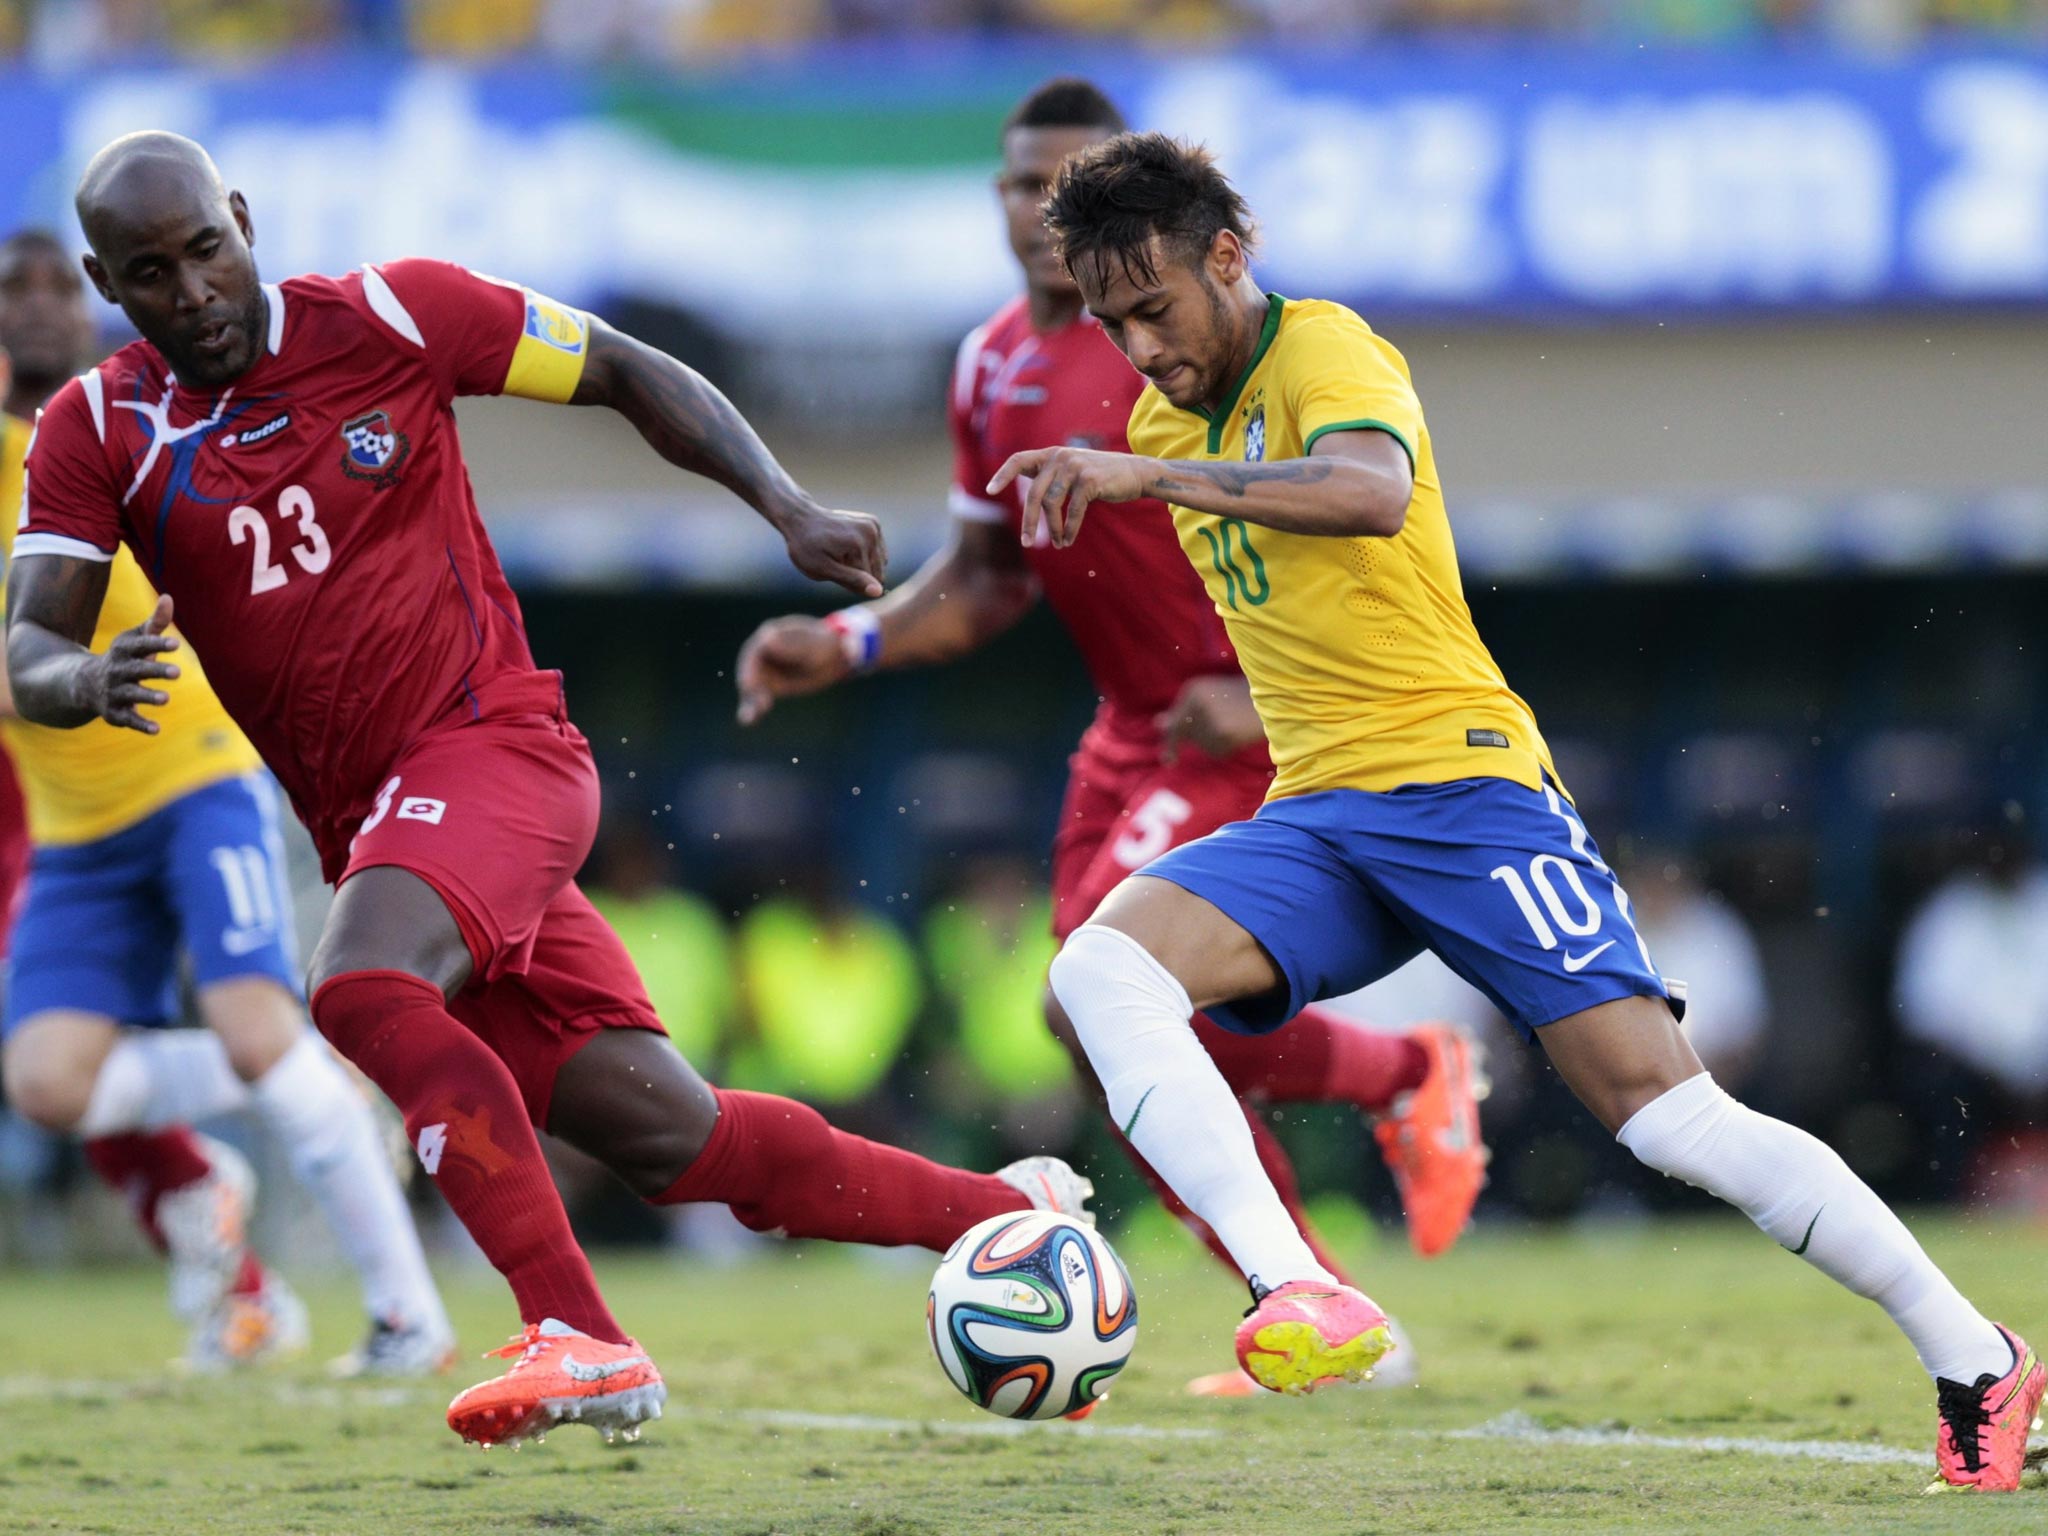 The weight of expectation will sit heavily on the shoulders of Neymar and his Brazil
team-mates